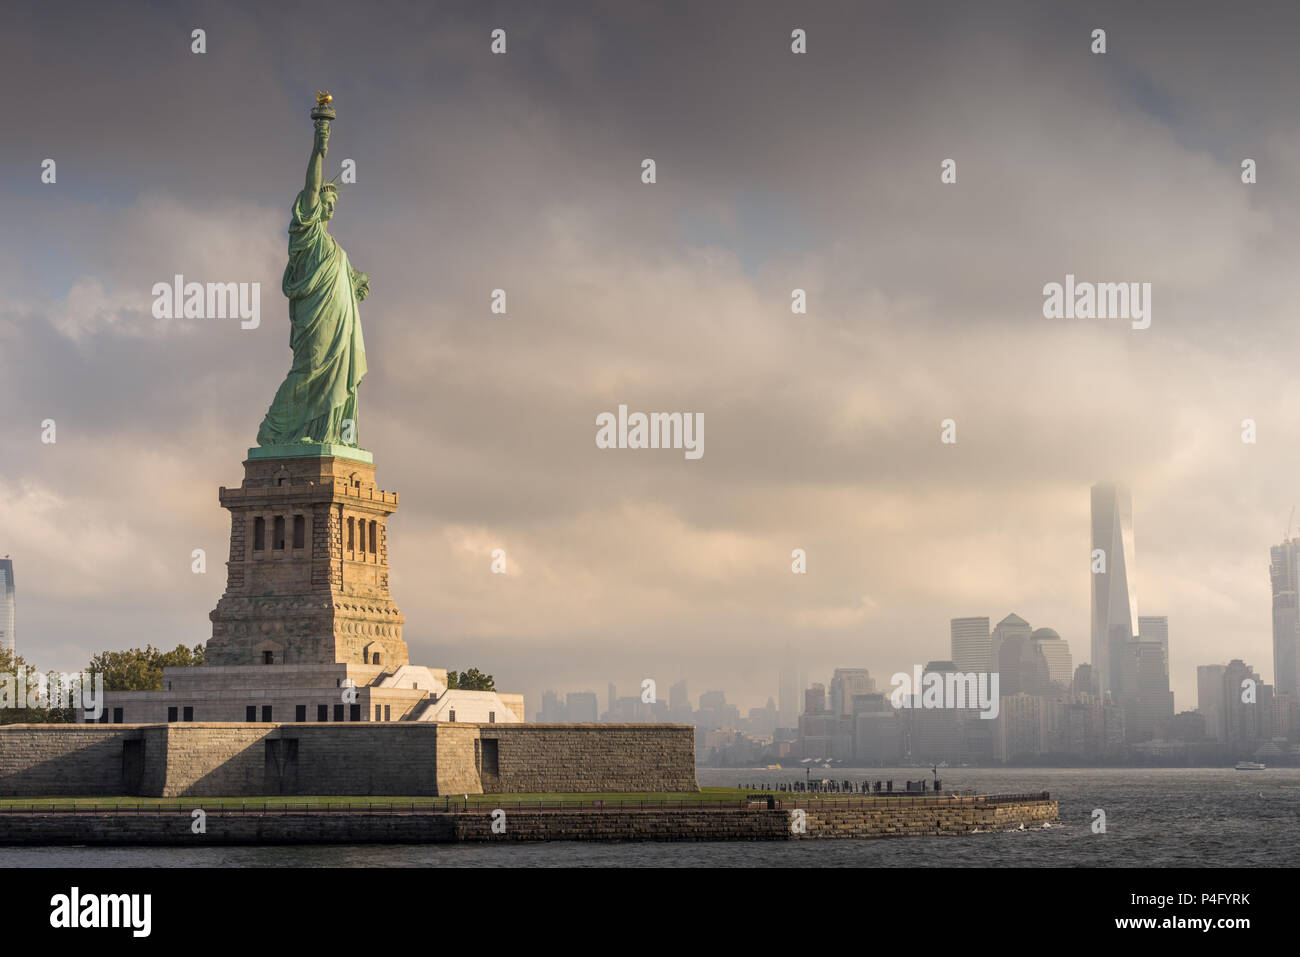 The Statue of Liberty looks proudly over the cloud covered Manhattan, New York City. Stock Photo